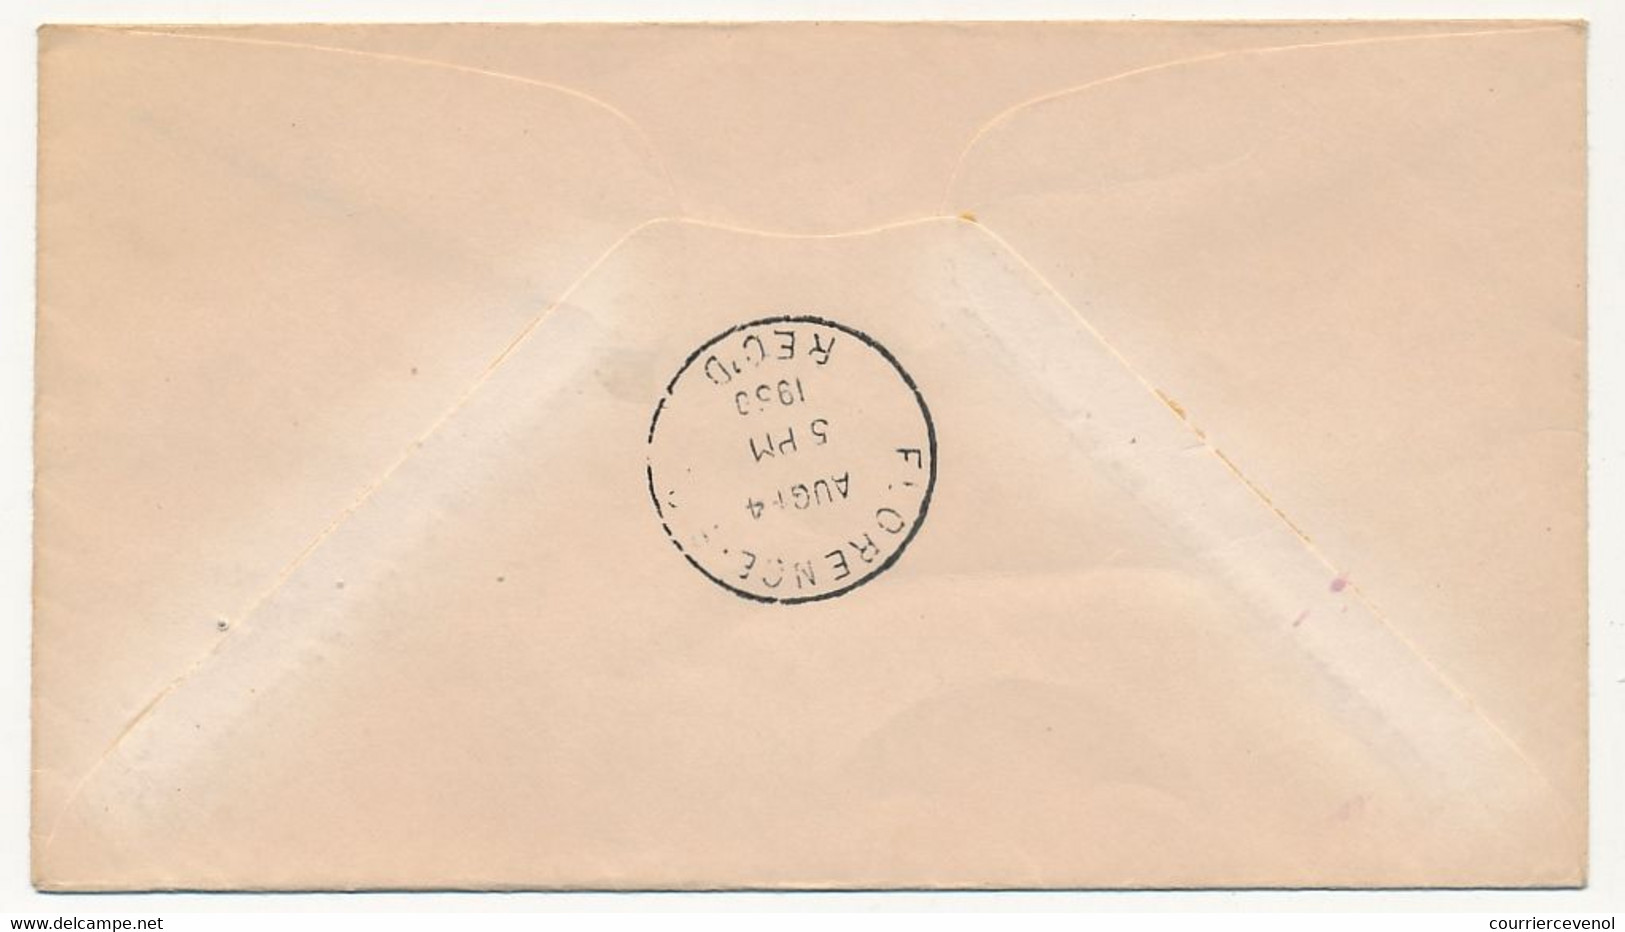 Etats Unis - First Trip Highway Post Office - FAYETTEVILLE, N.C. & FLORENCE, S.C. - 14 Aout 1950 - Storia Postale